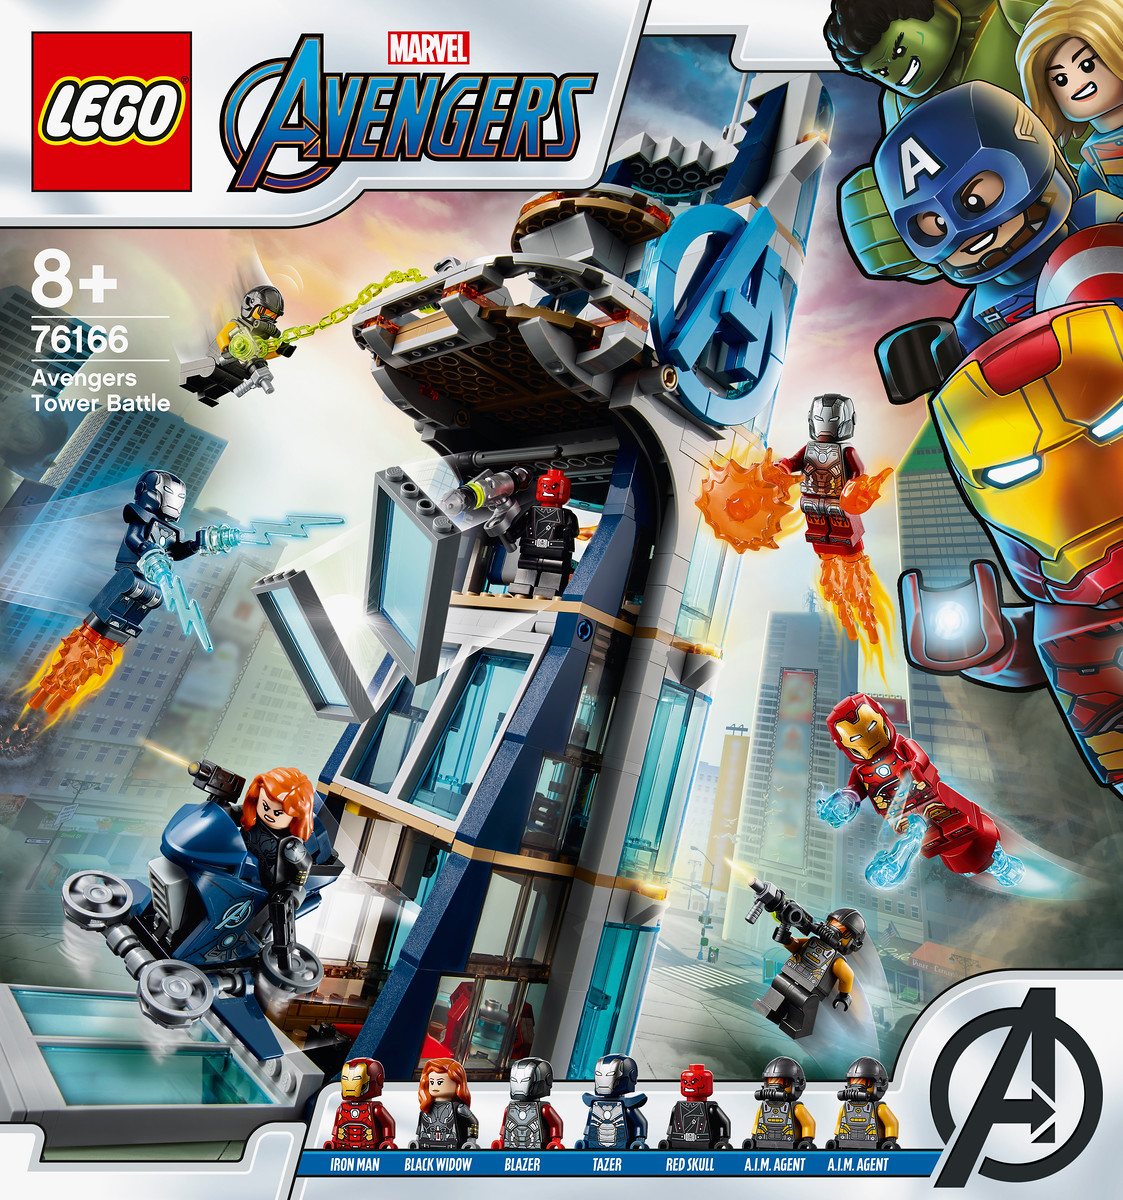 New LEGO Marvel Avengers Sets Coming to Target In June